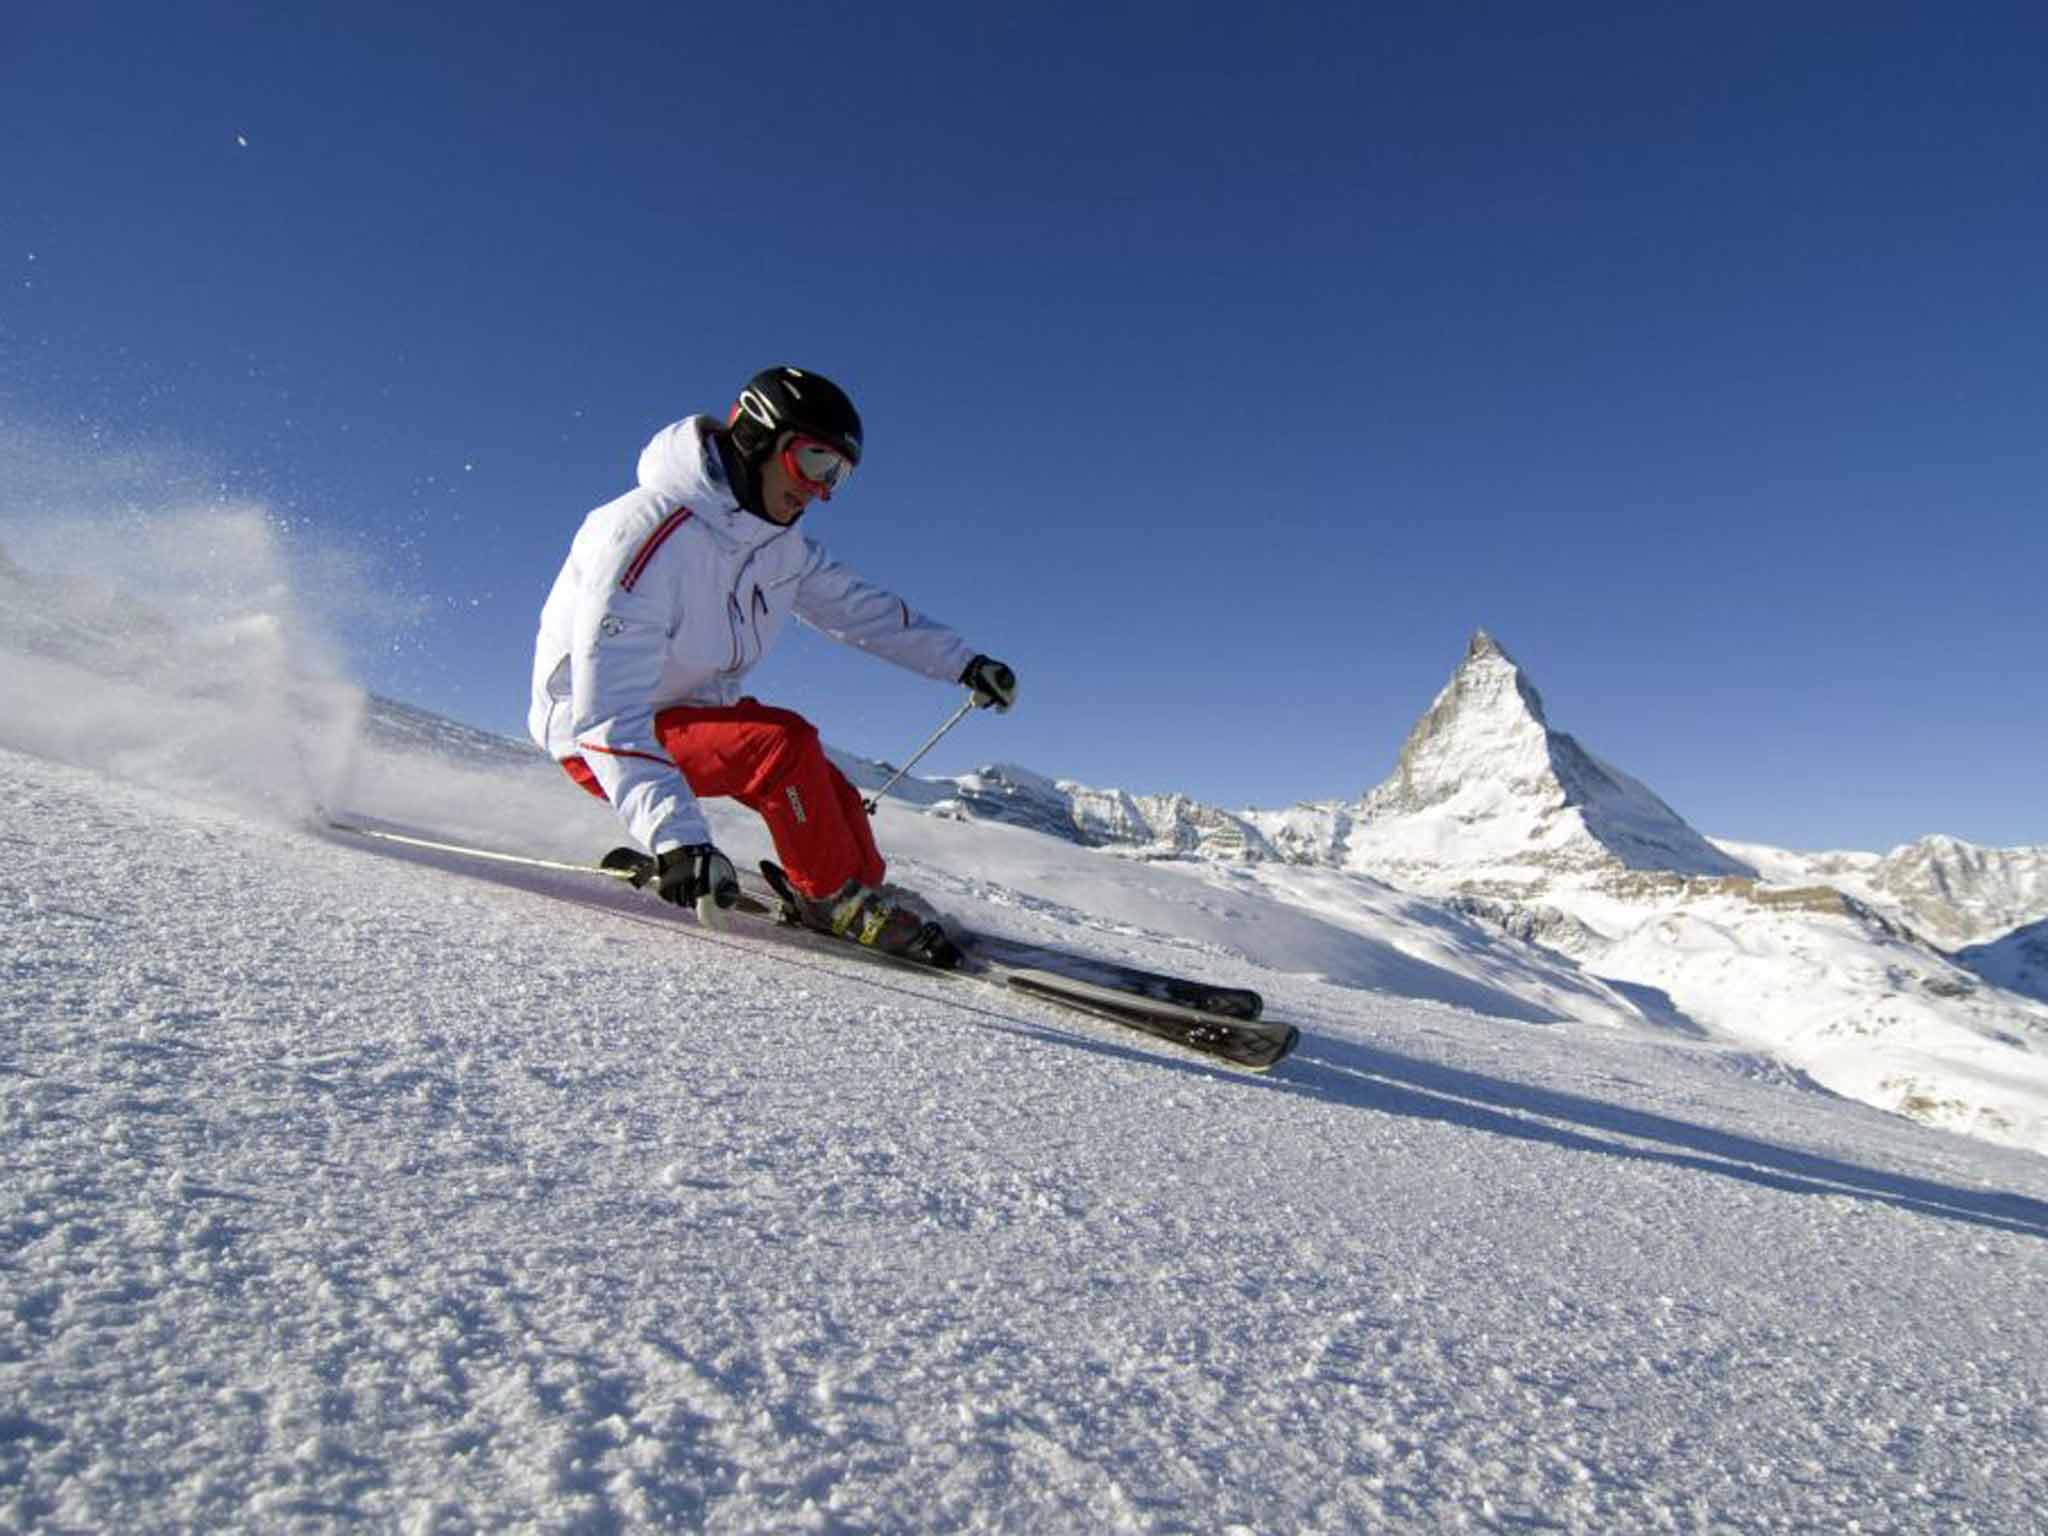 Zermatt expects 55cm of new snow by Friday